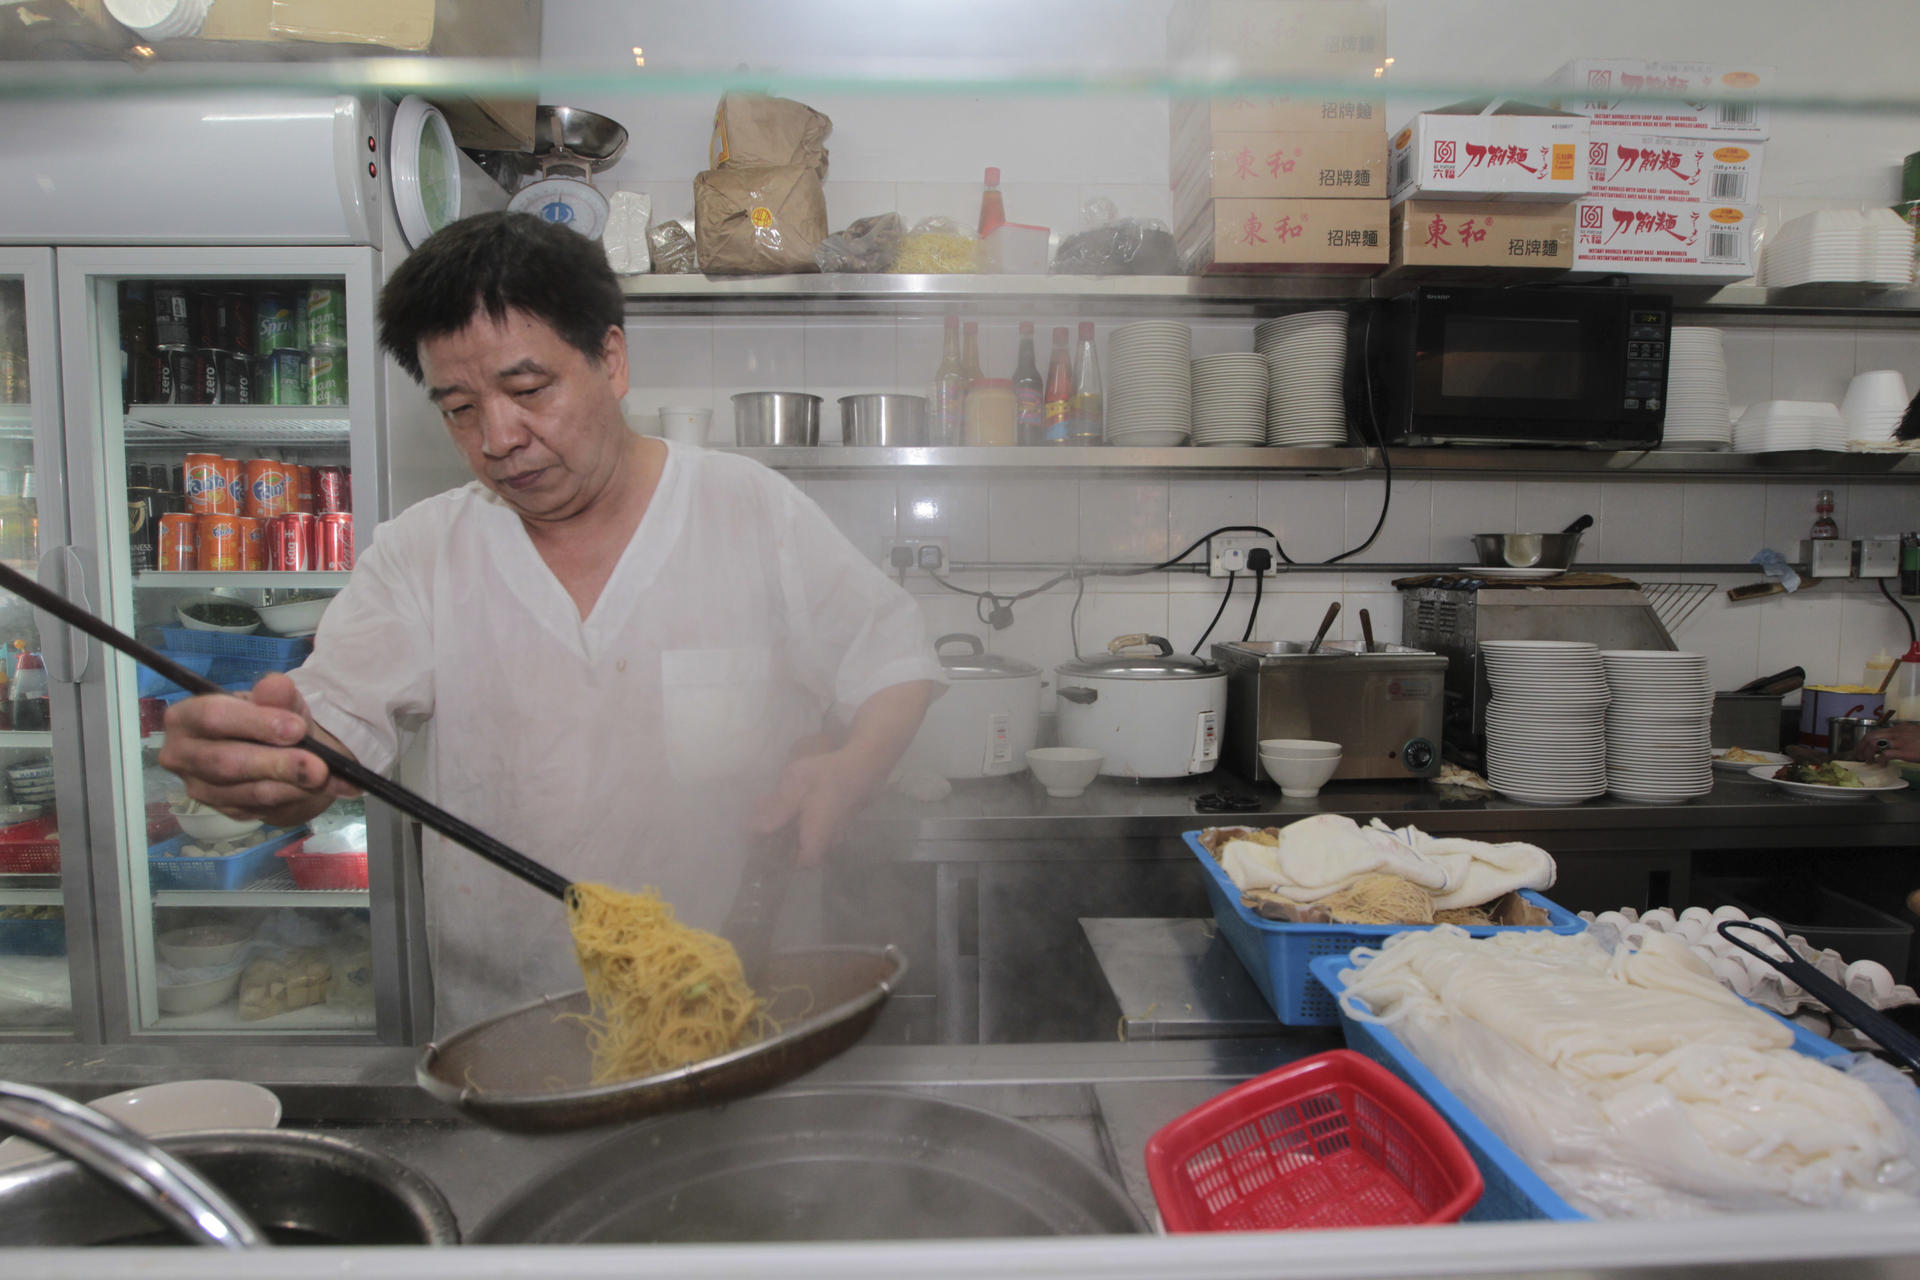 Cooking noodles at House of Ho Yuen. Photos: Bruce Yan